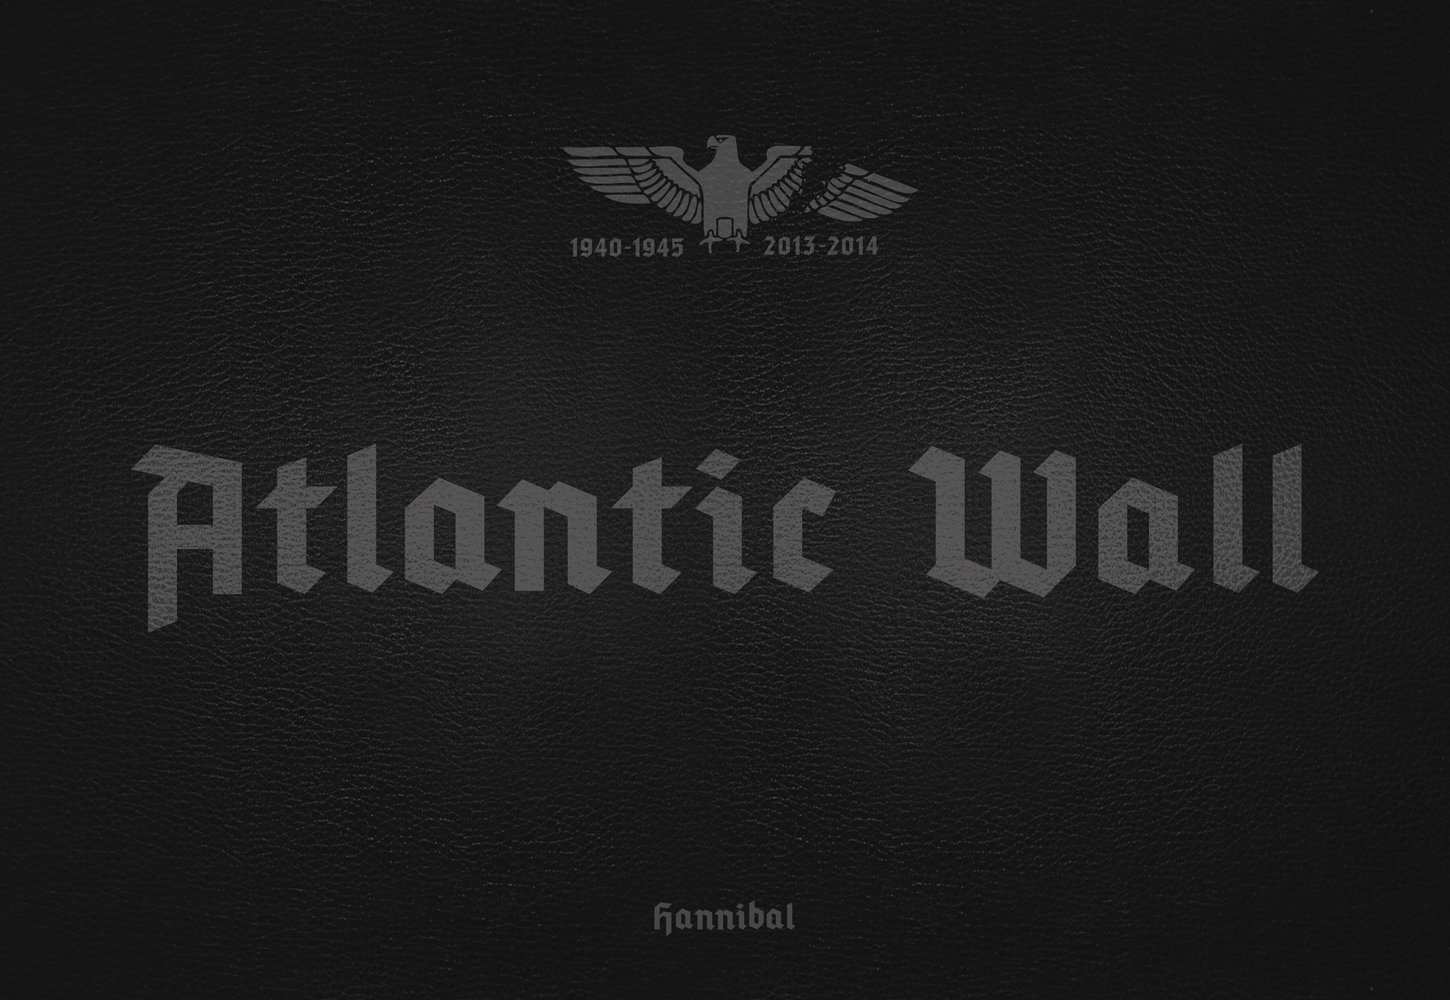 Grey font across centre of black landscape cover, with Nazi eagle to top, of 'Atlantic Wall', by Hannibal Books.